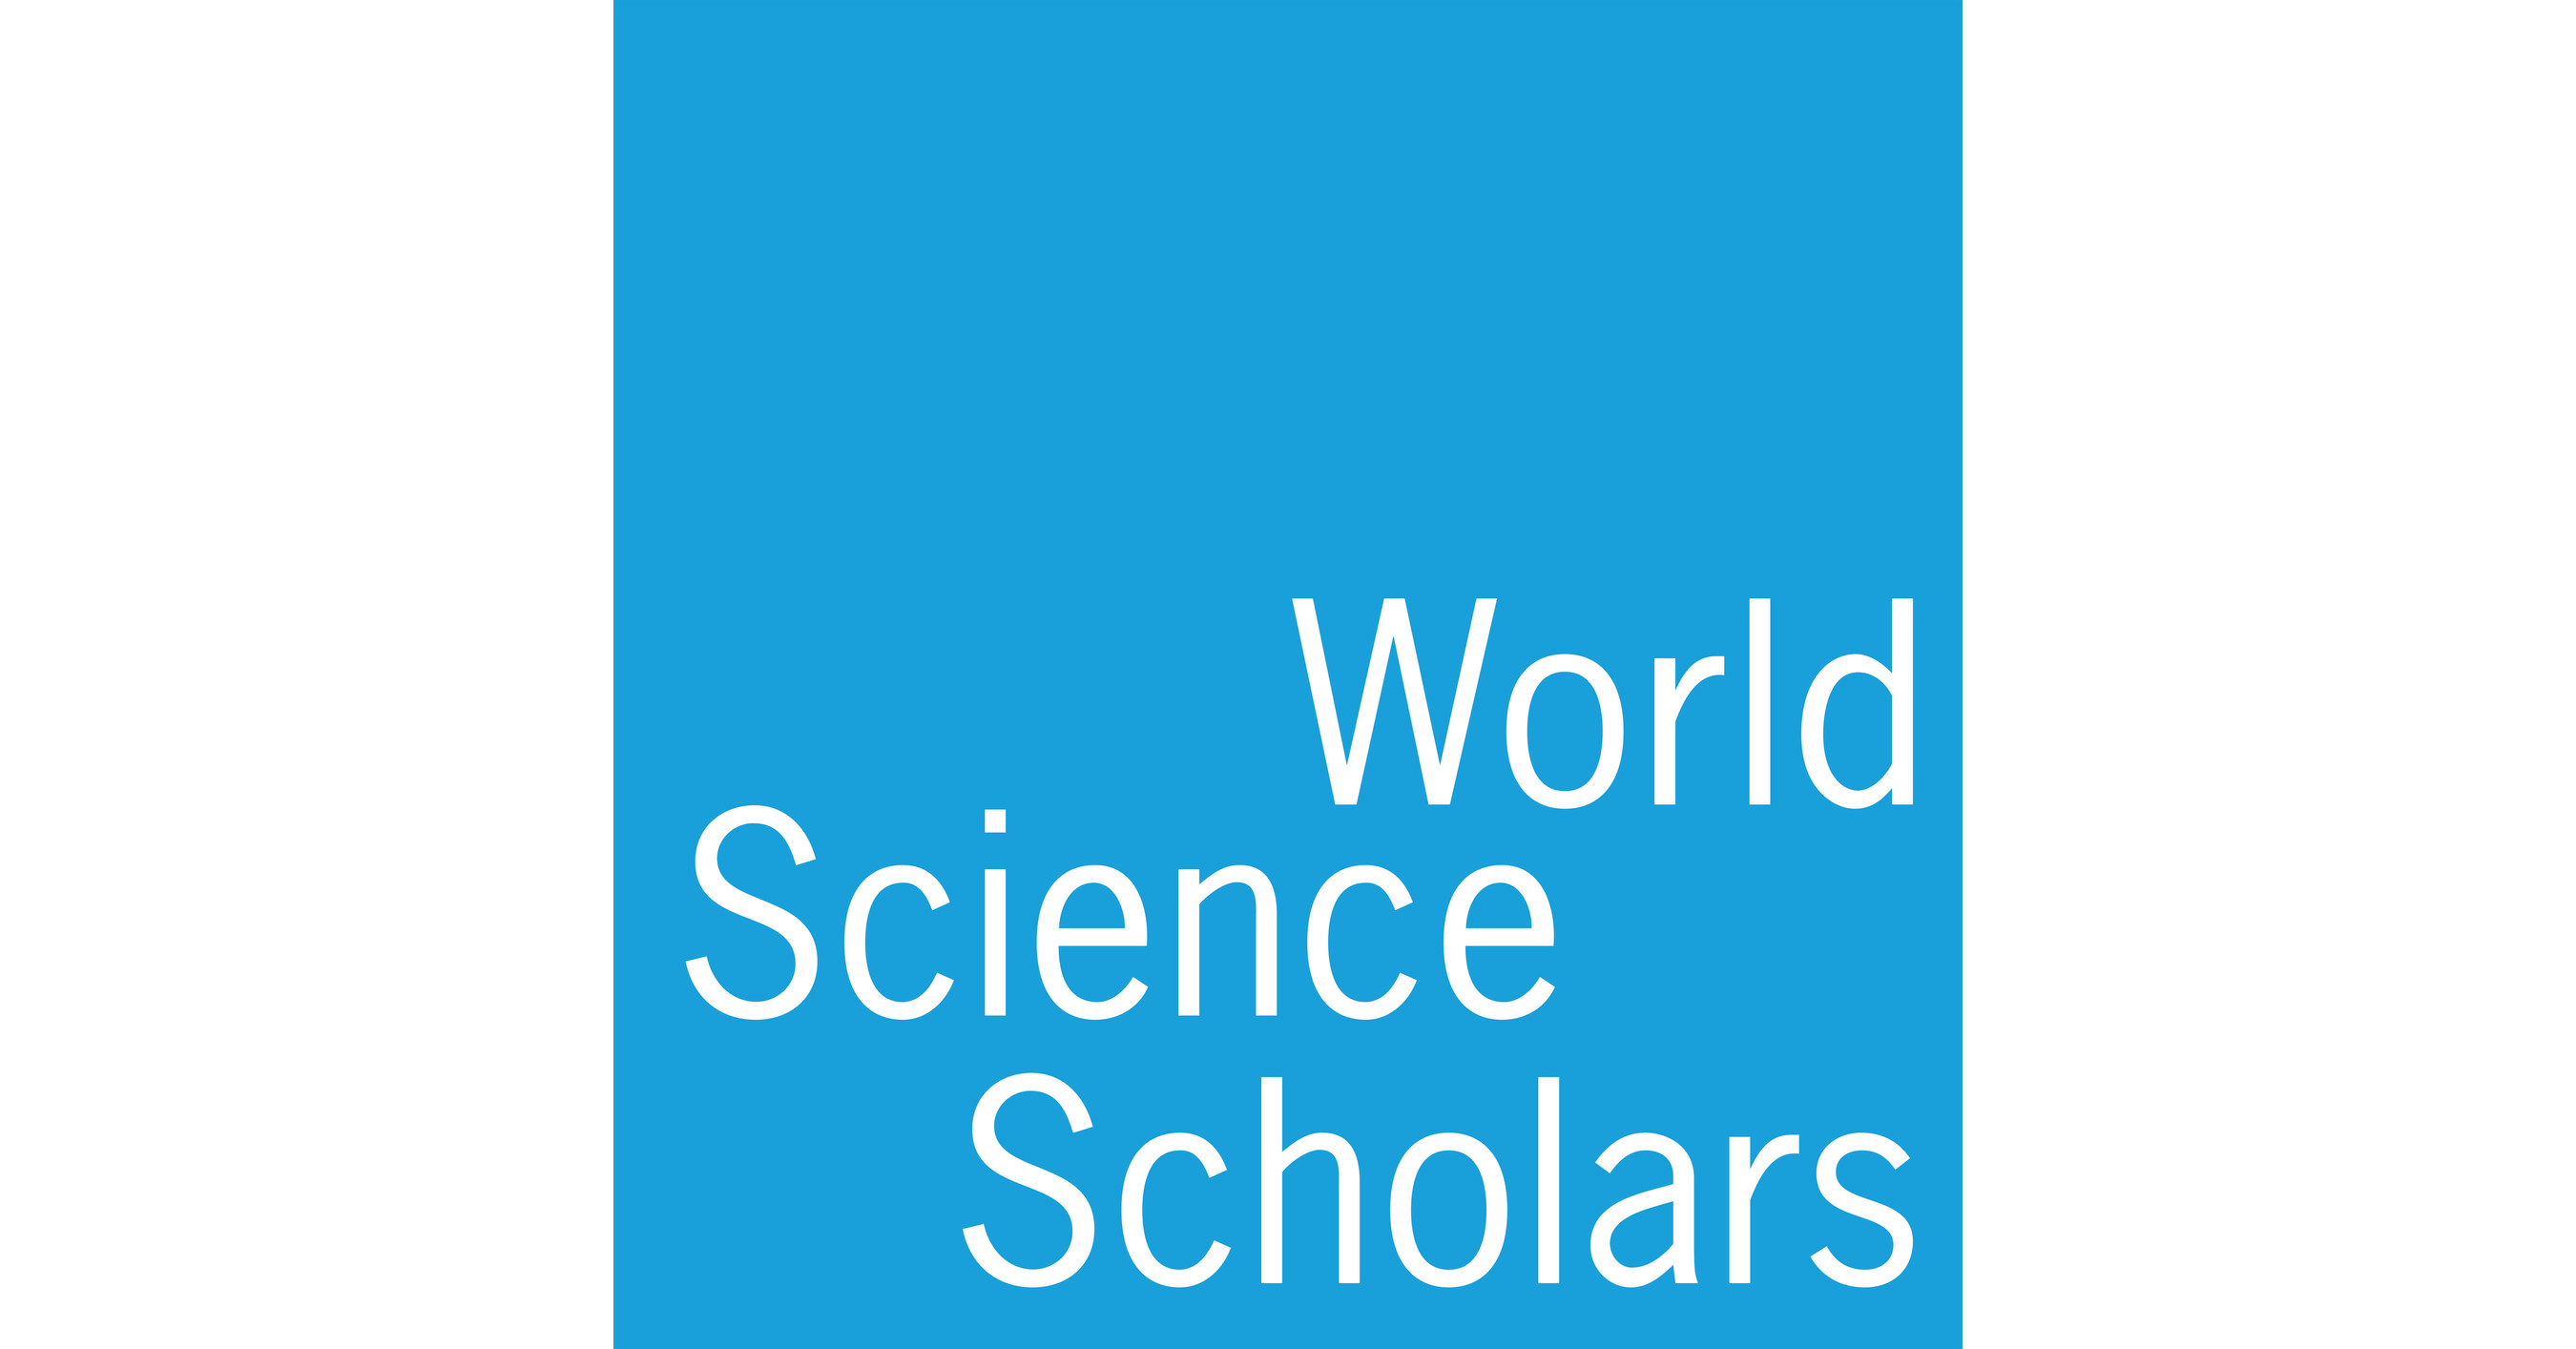 World Science Scholars Hosts Science Festival for Gifted Students From 15 Countries and 6 Continents